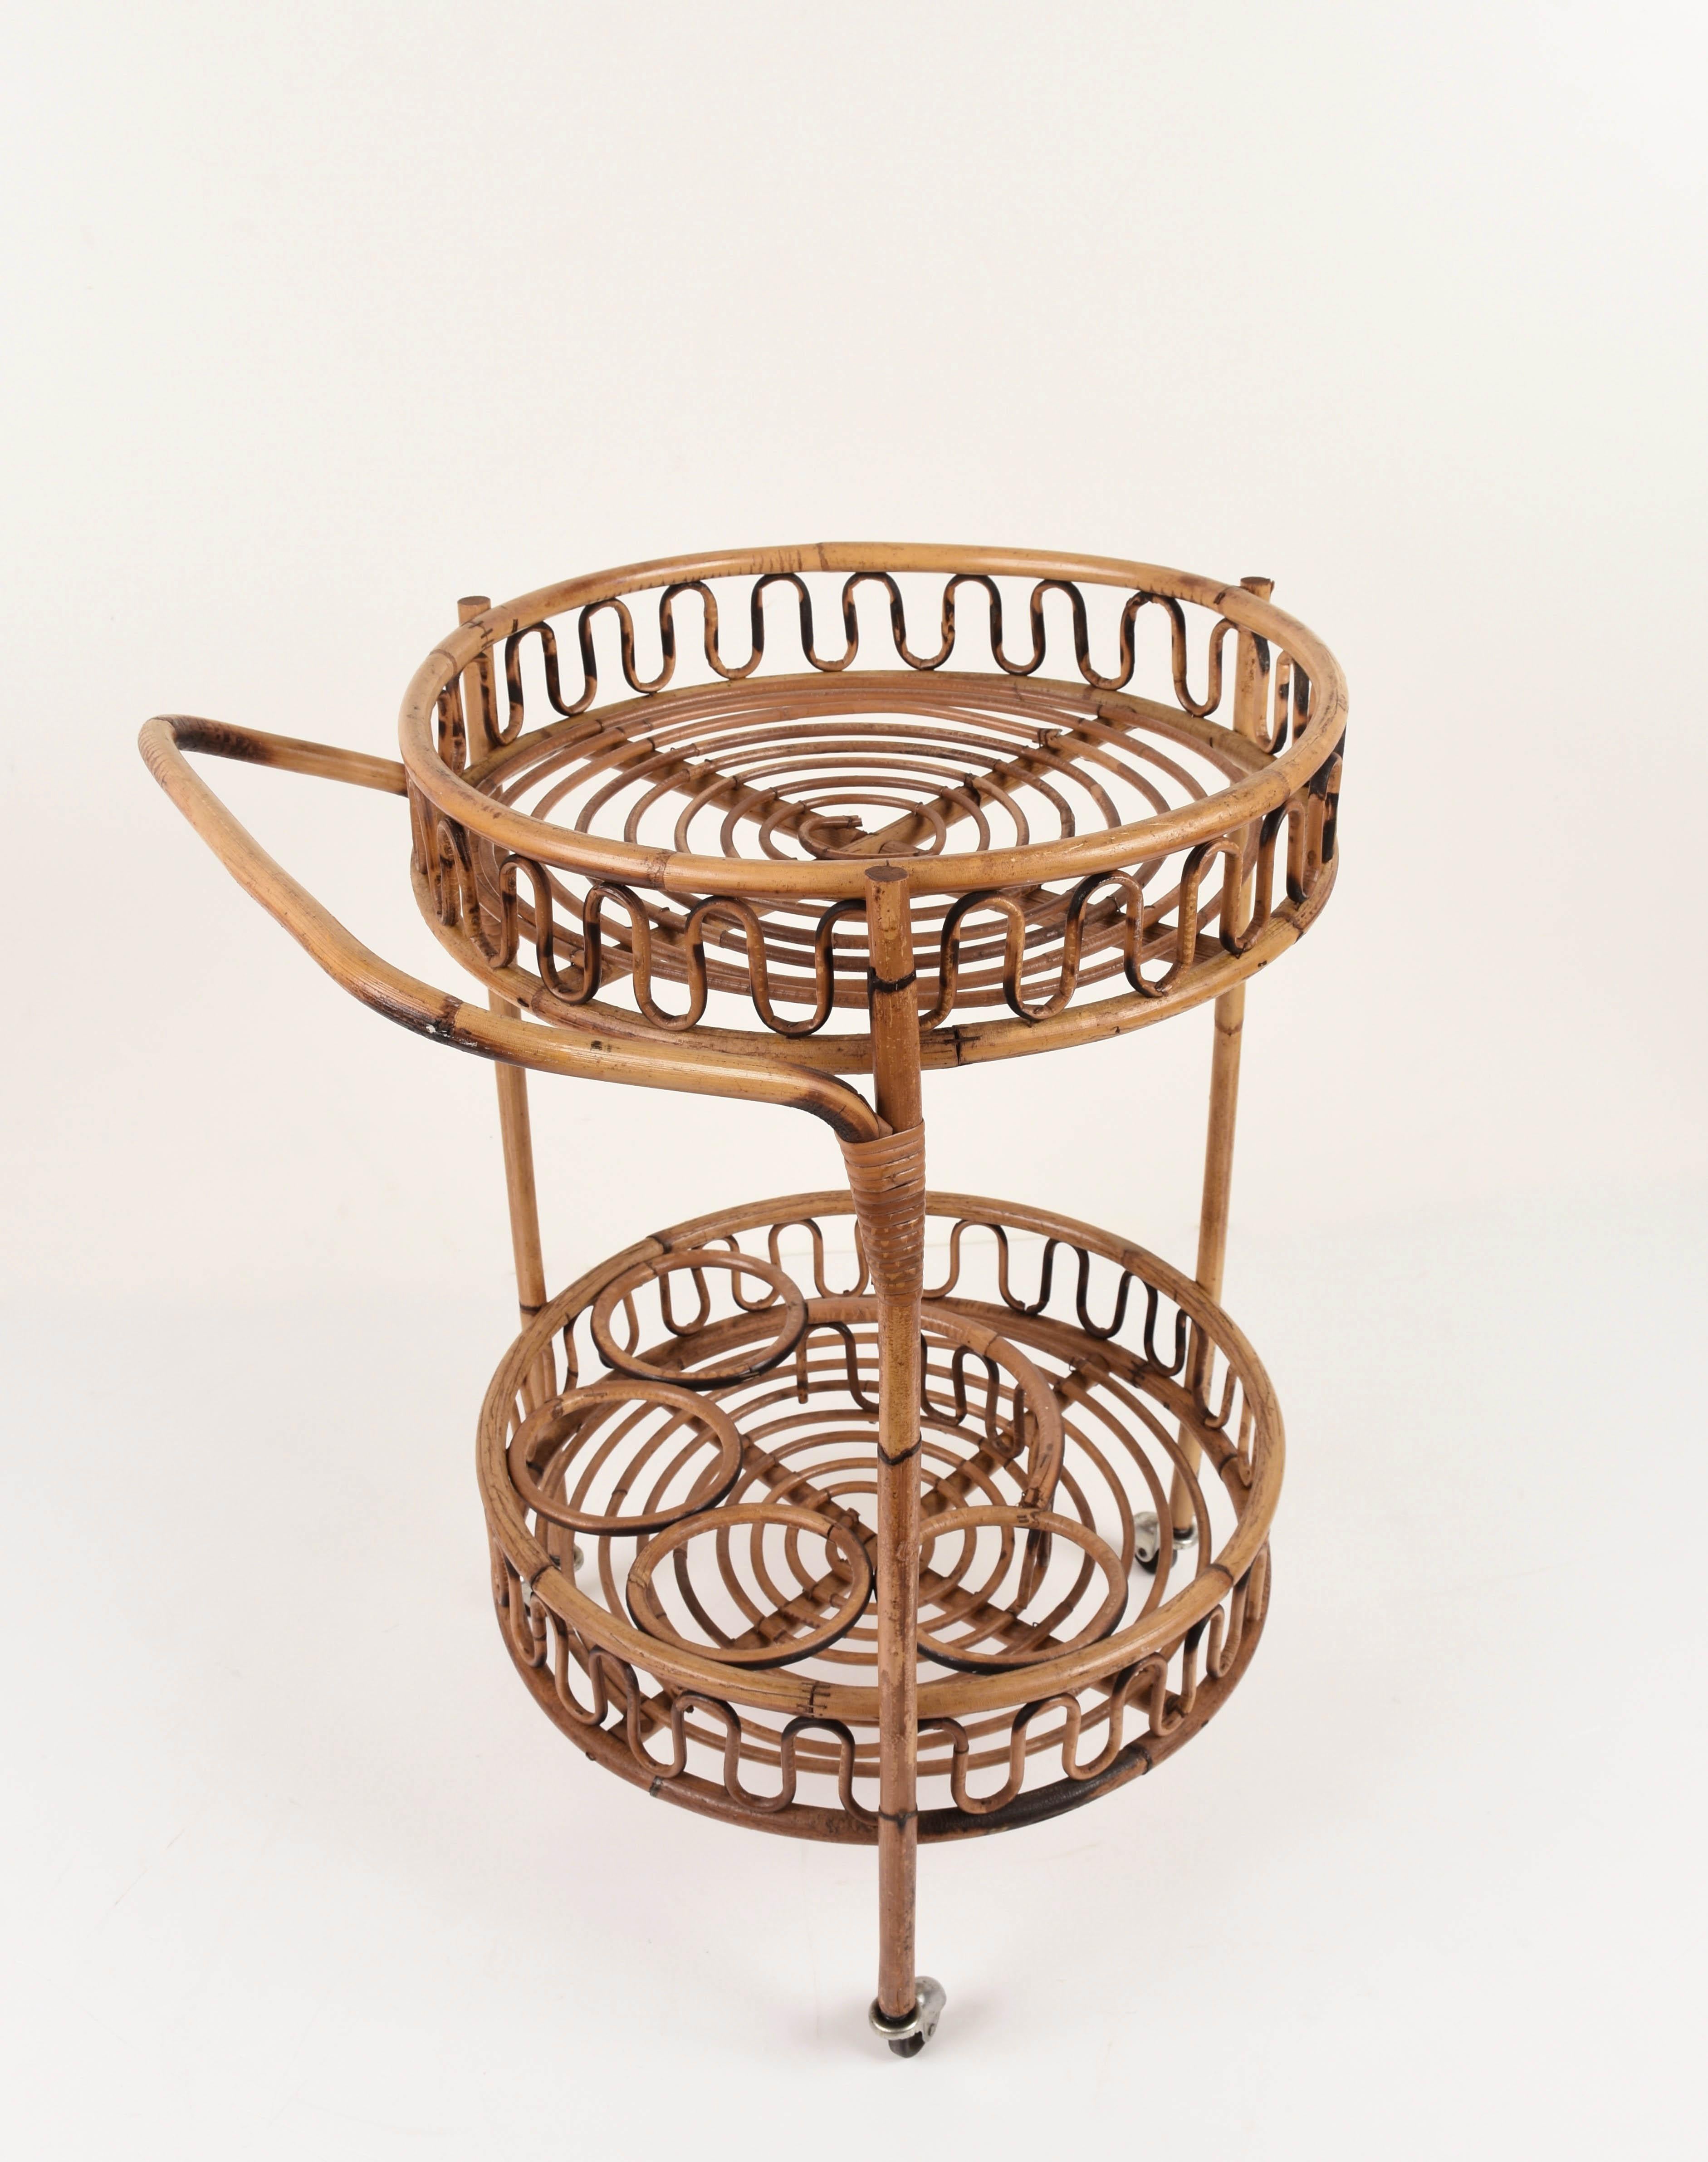 Fabulous midcentury Italian bamboo and rattan round serving bar cart side table. This fantastic piece was produced in Italy during 1960s.

This wonderful item has a bamboo structure and a rattan base with two levels and two large wheels at the